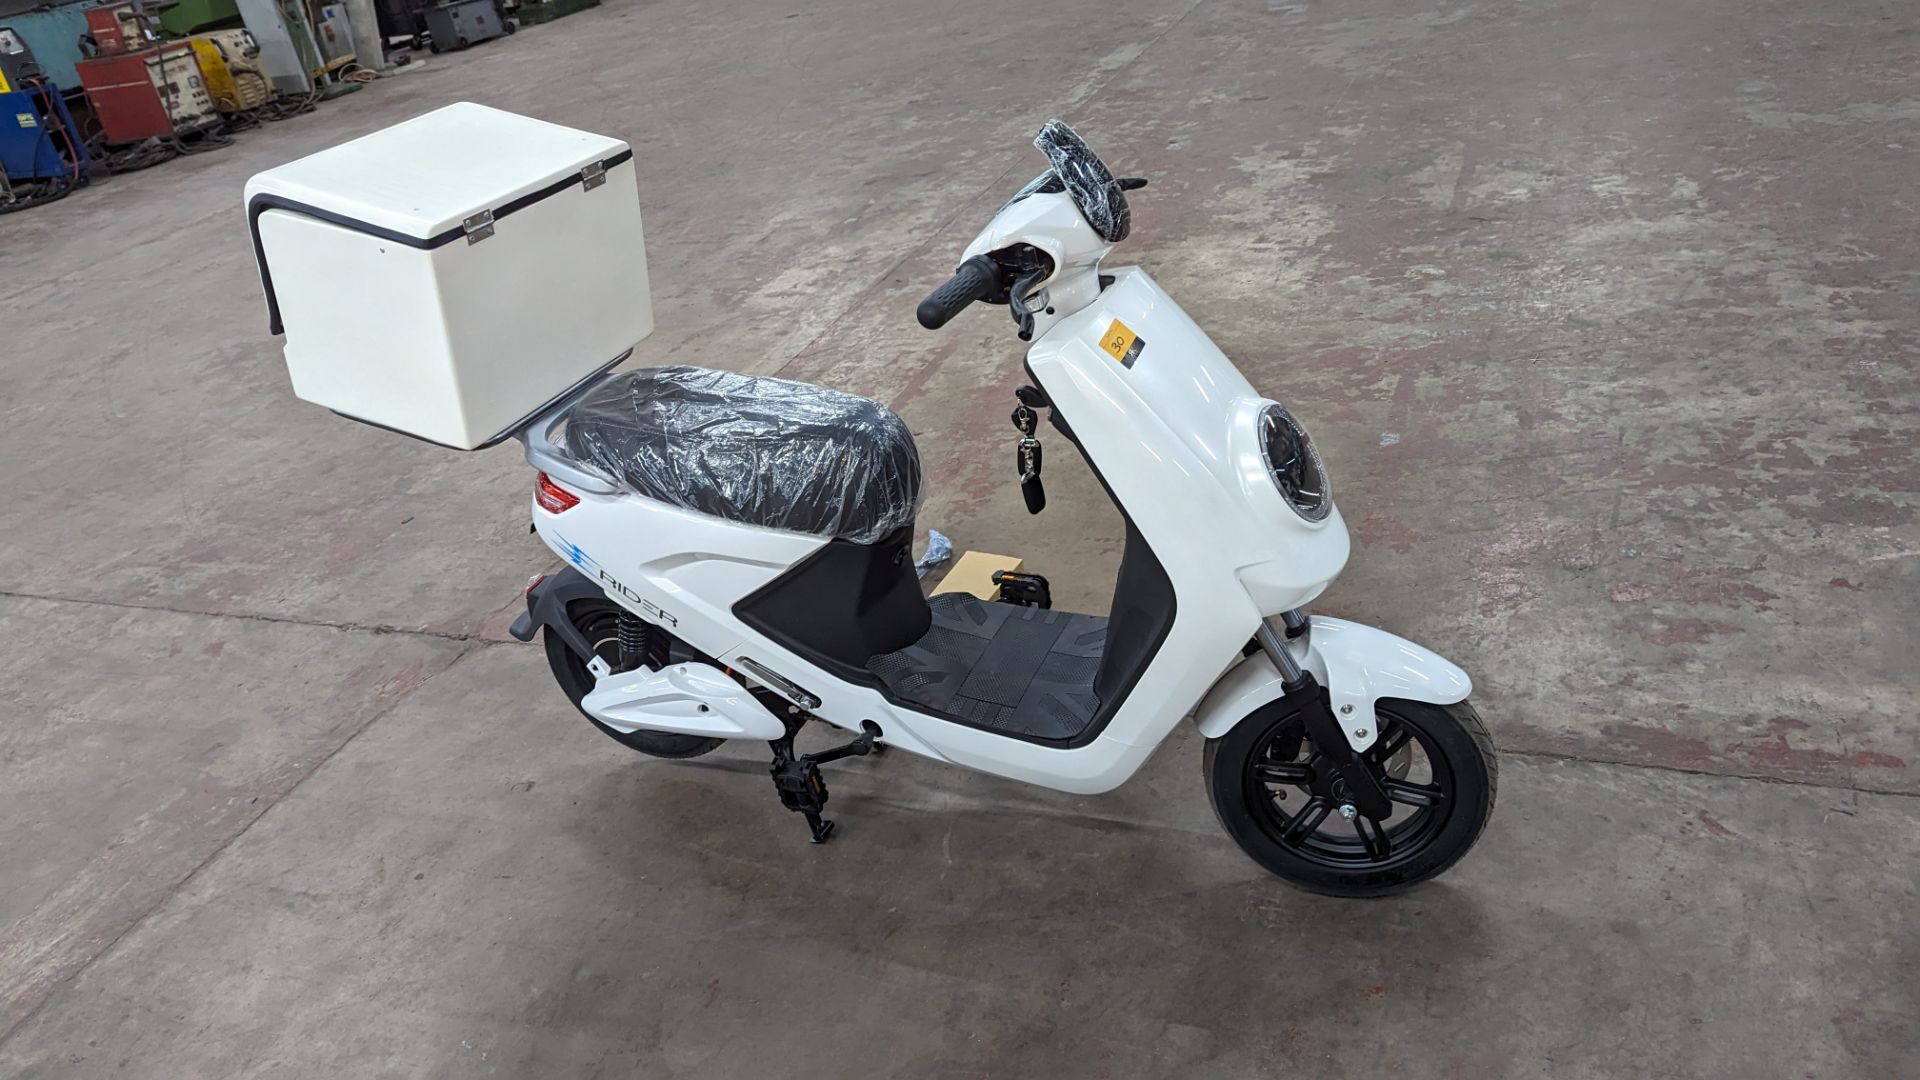 Model 18 Electric Bike: Zero (0) recorded miles, white body with black detailing, insulated box moun - Image 6 of 16